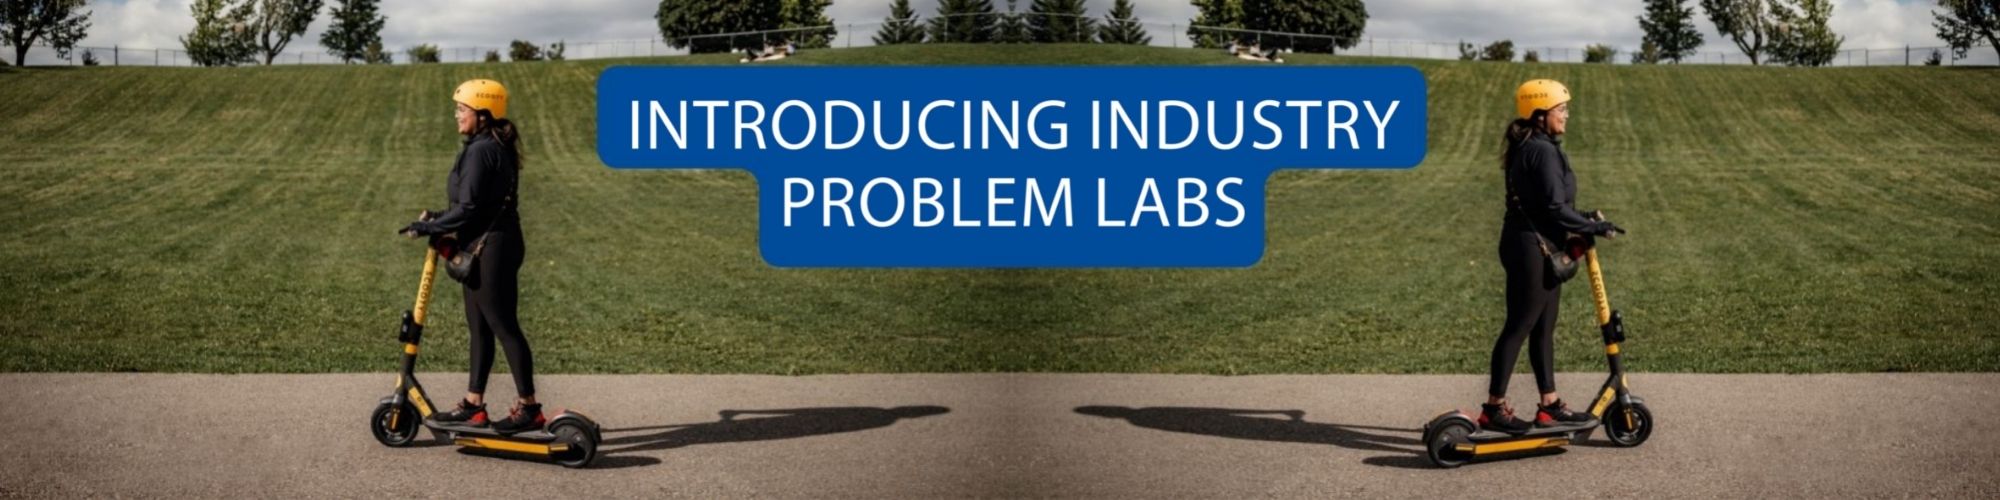 Introducing Industry Problem Labs